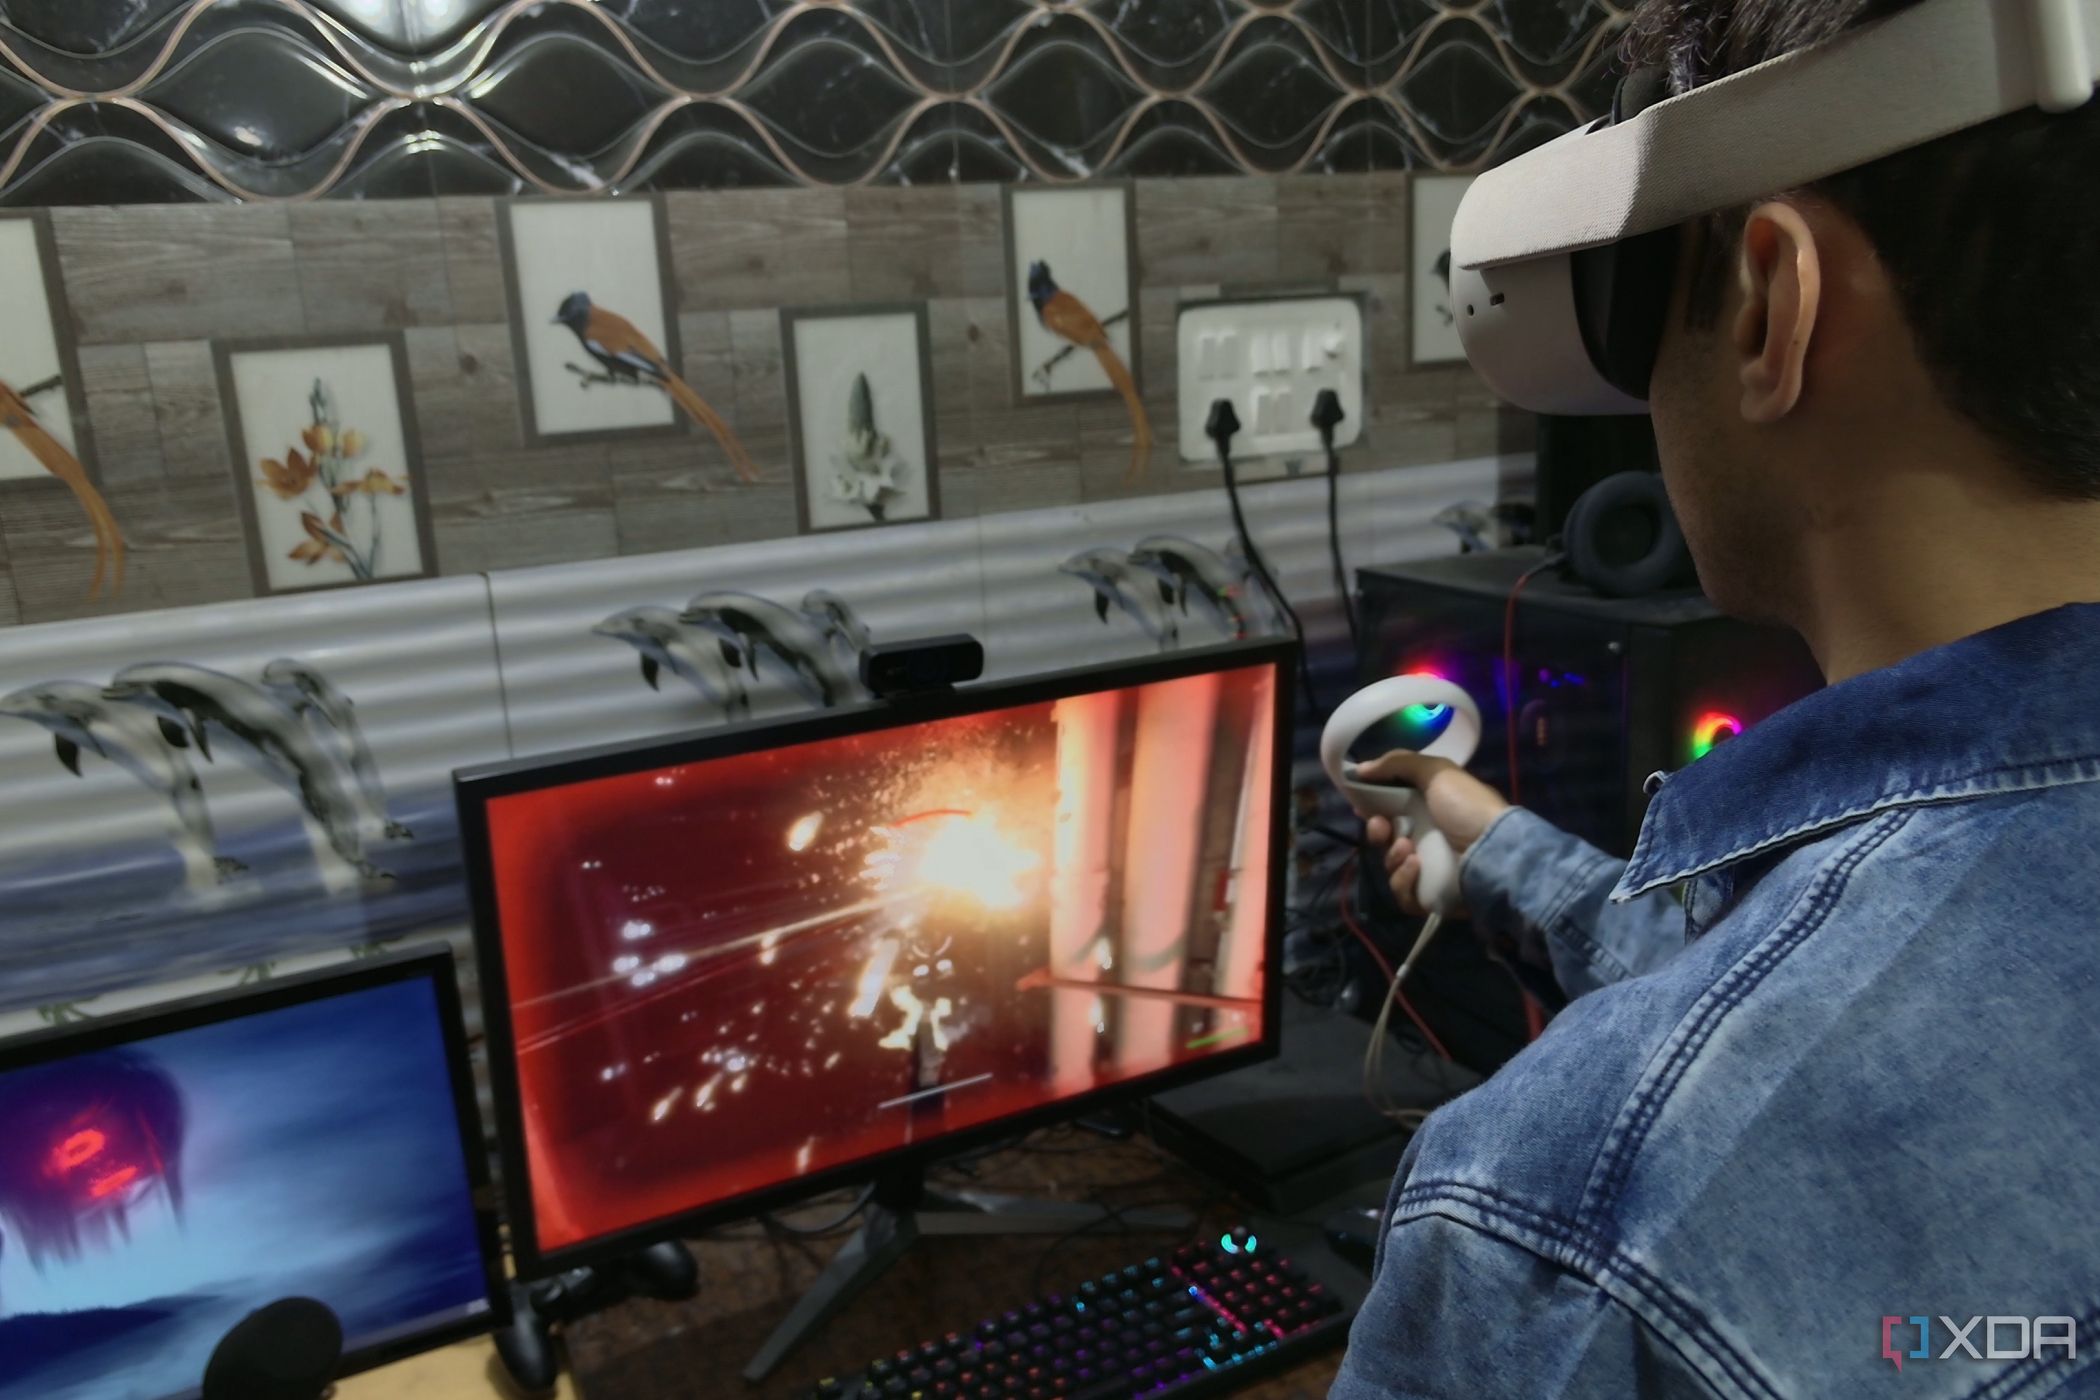 How to play almost any Unreal Engine game in VR